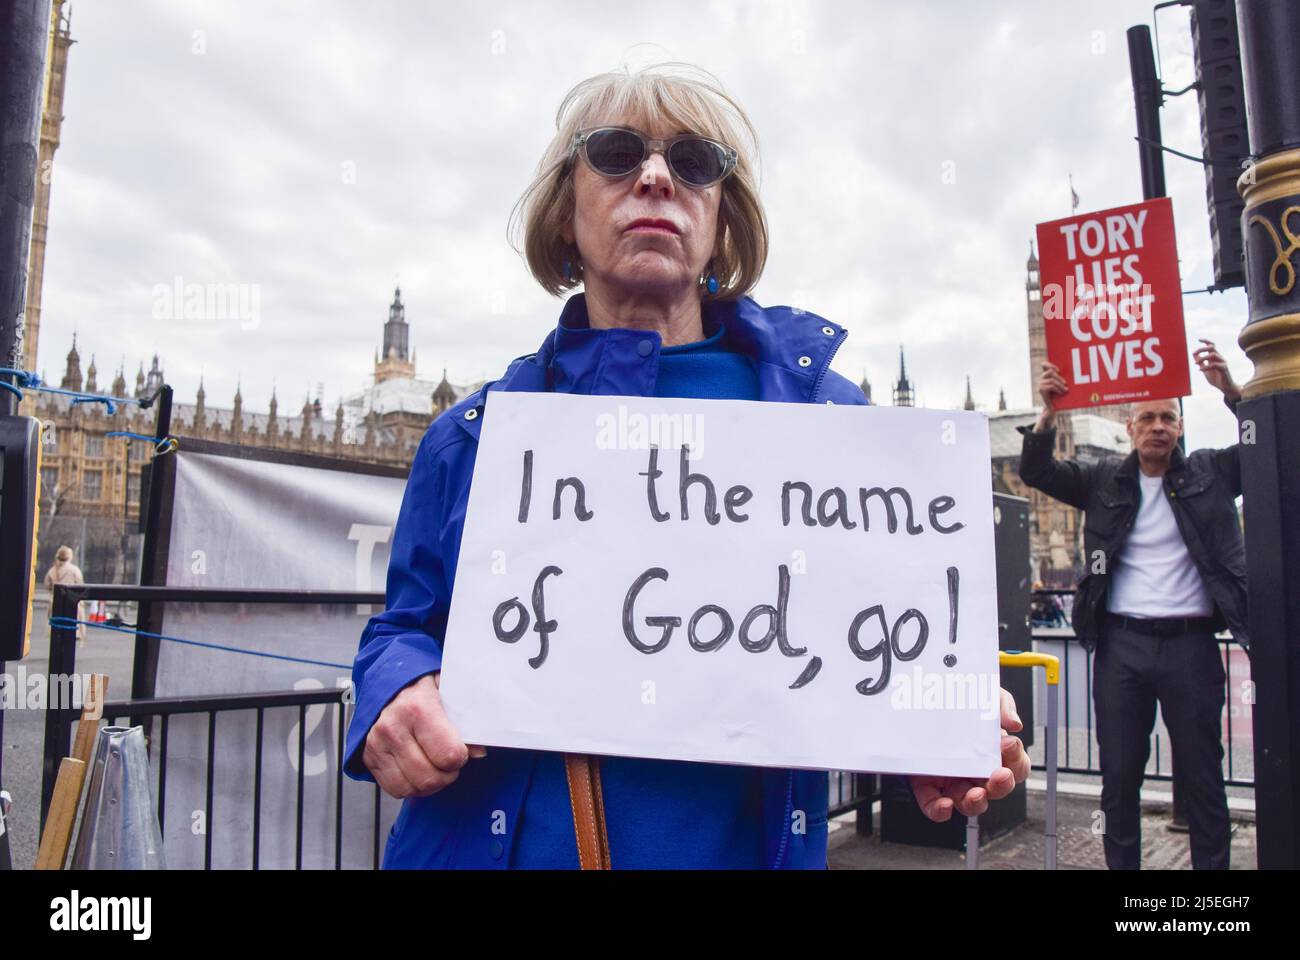 London, UK. 19th April 2022. A protester holds a sign which reads 'In the name of God, go!' Anti-Boris Johnson protesters gathered in Parliament Square ahead of the Prime Minister's appearance in the House of Commons, where he was scheduled to address the Partygate scandal. Stock Photo